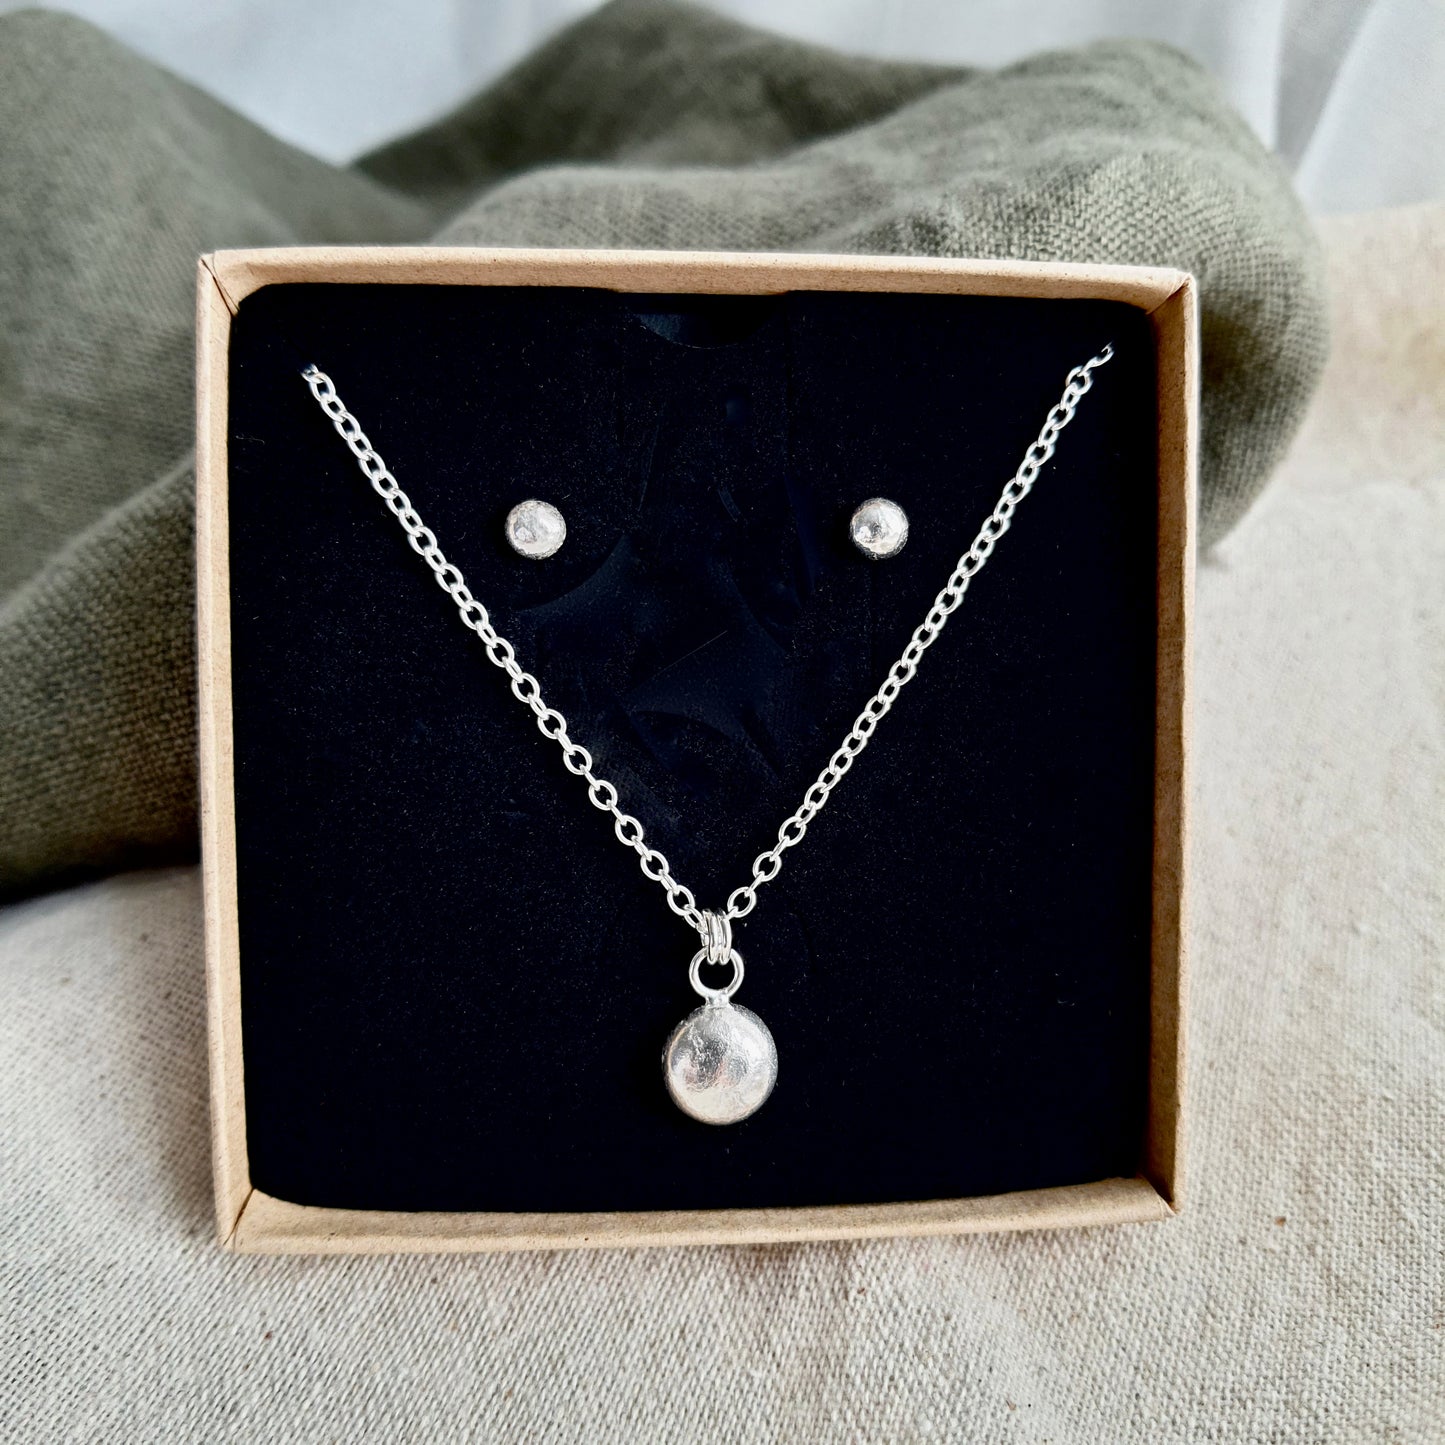 Pebble Necklace and Earrings Set